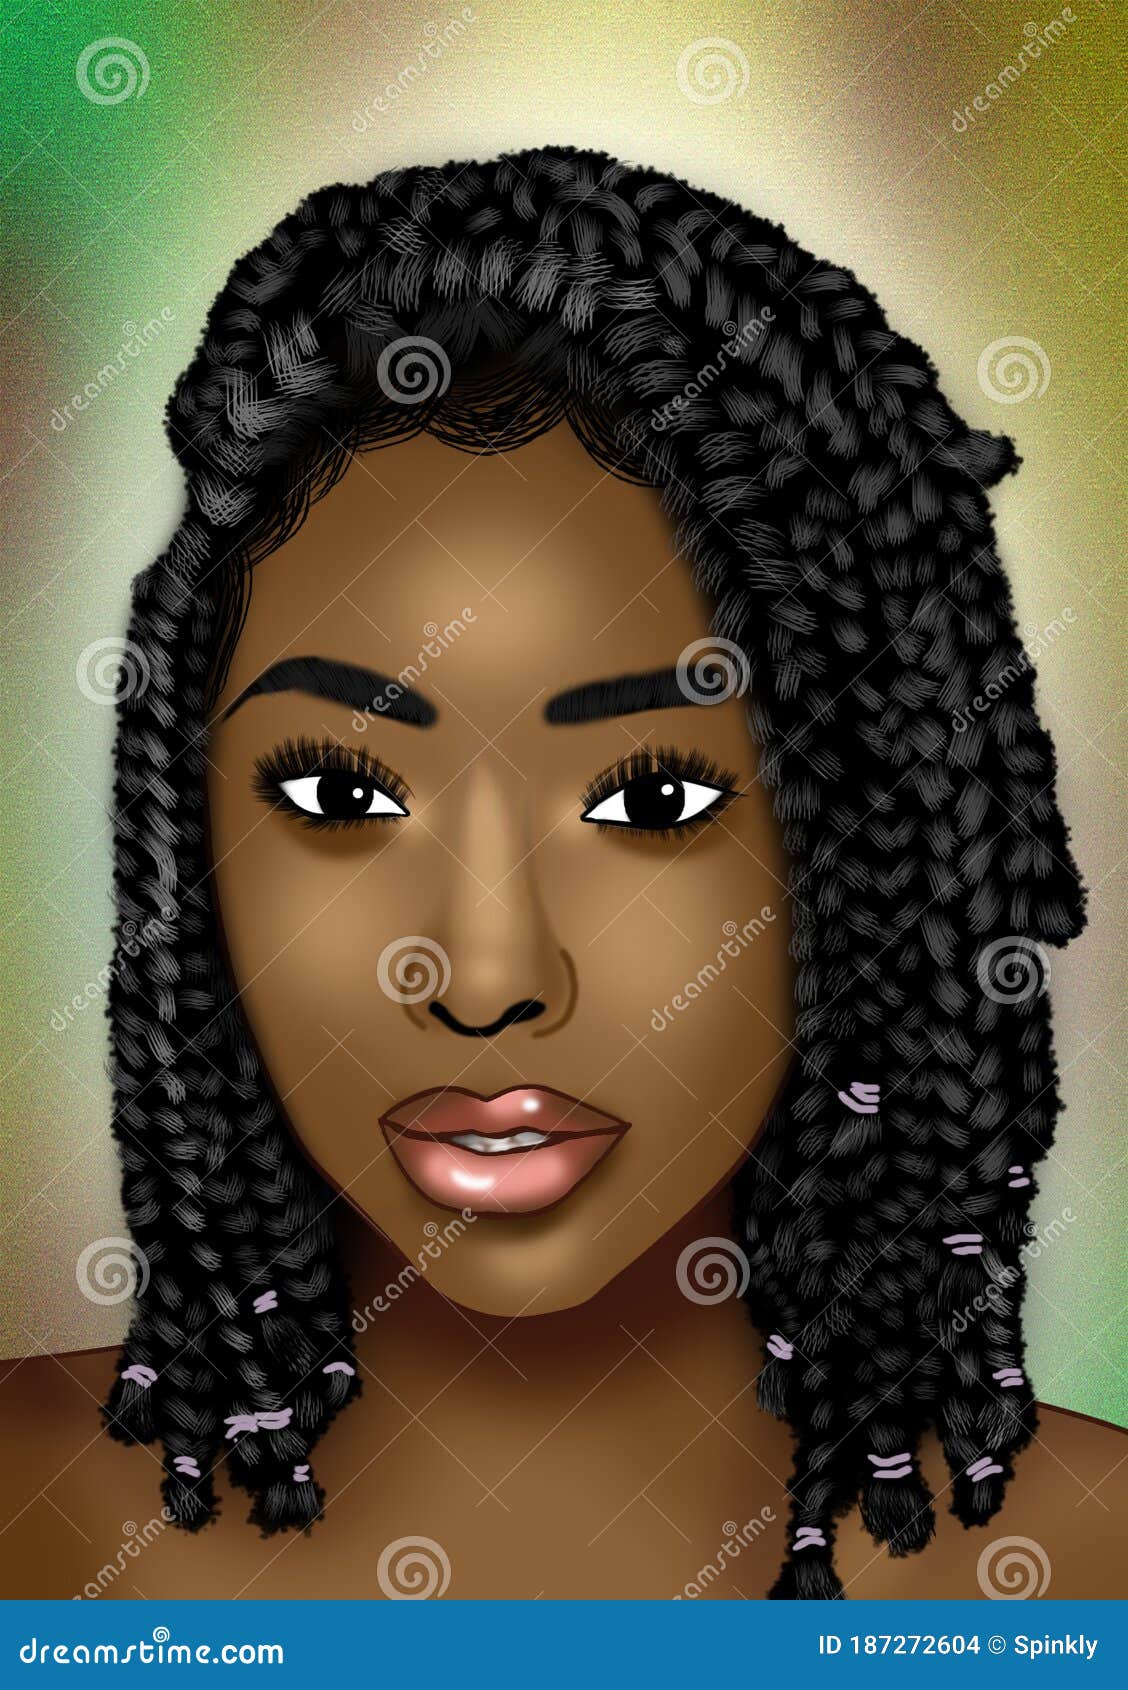 Black Woman Illustration with Braids for Hairstyle Stock Illustration -  Illustration of african, beauty: 187272604